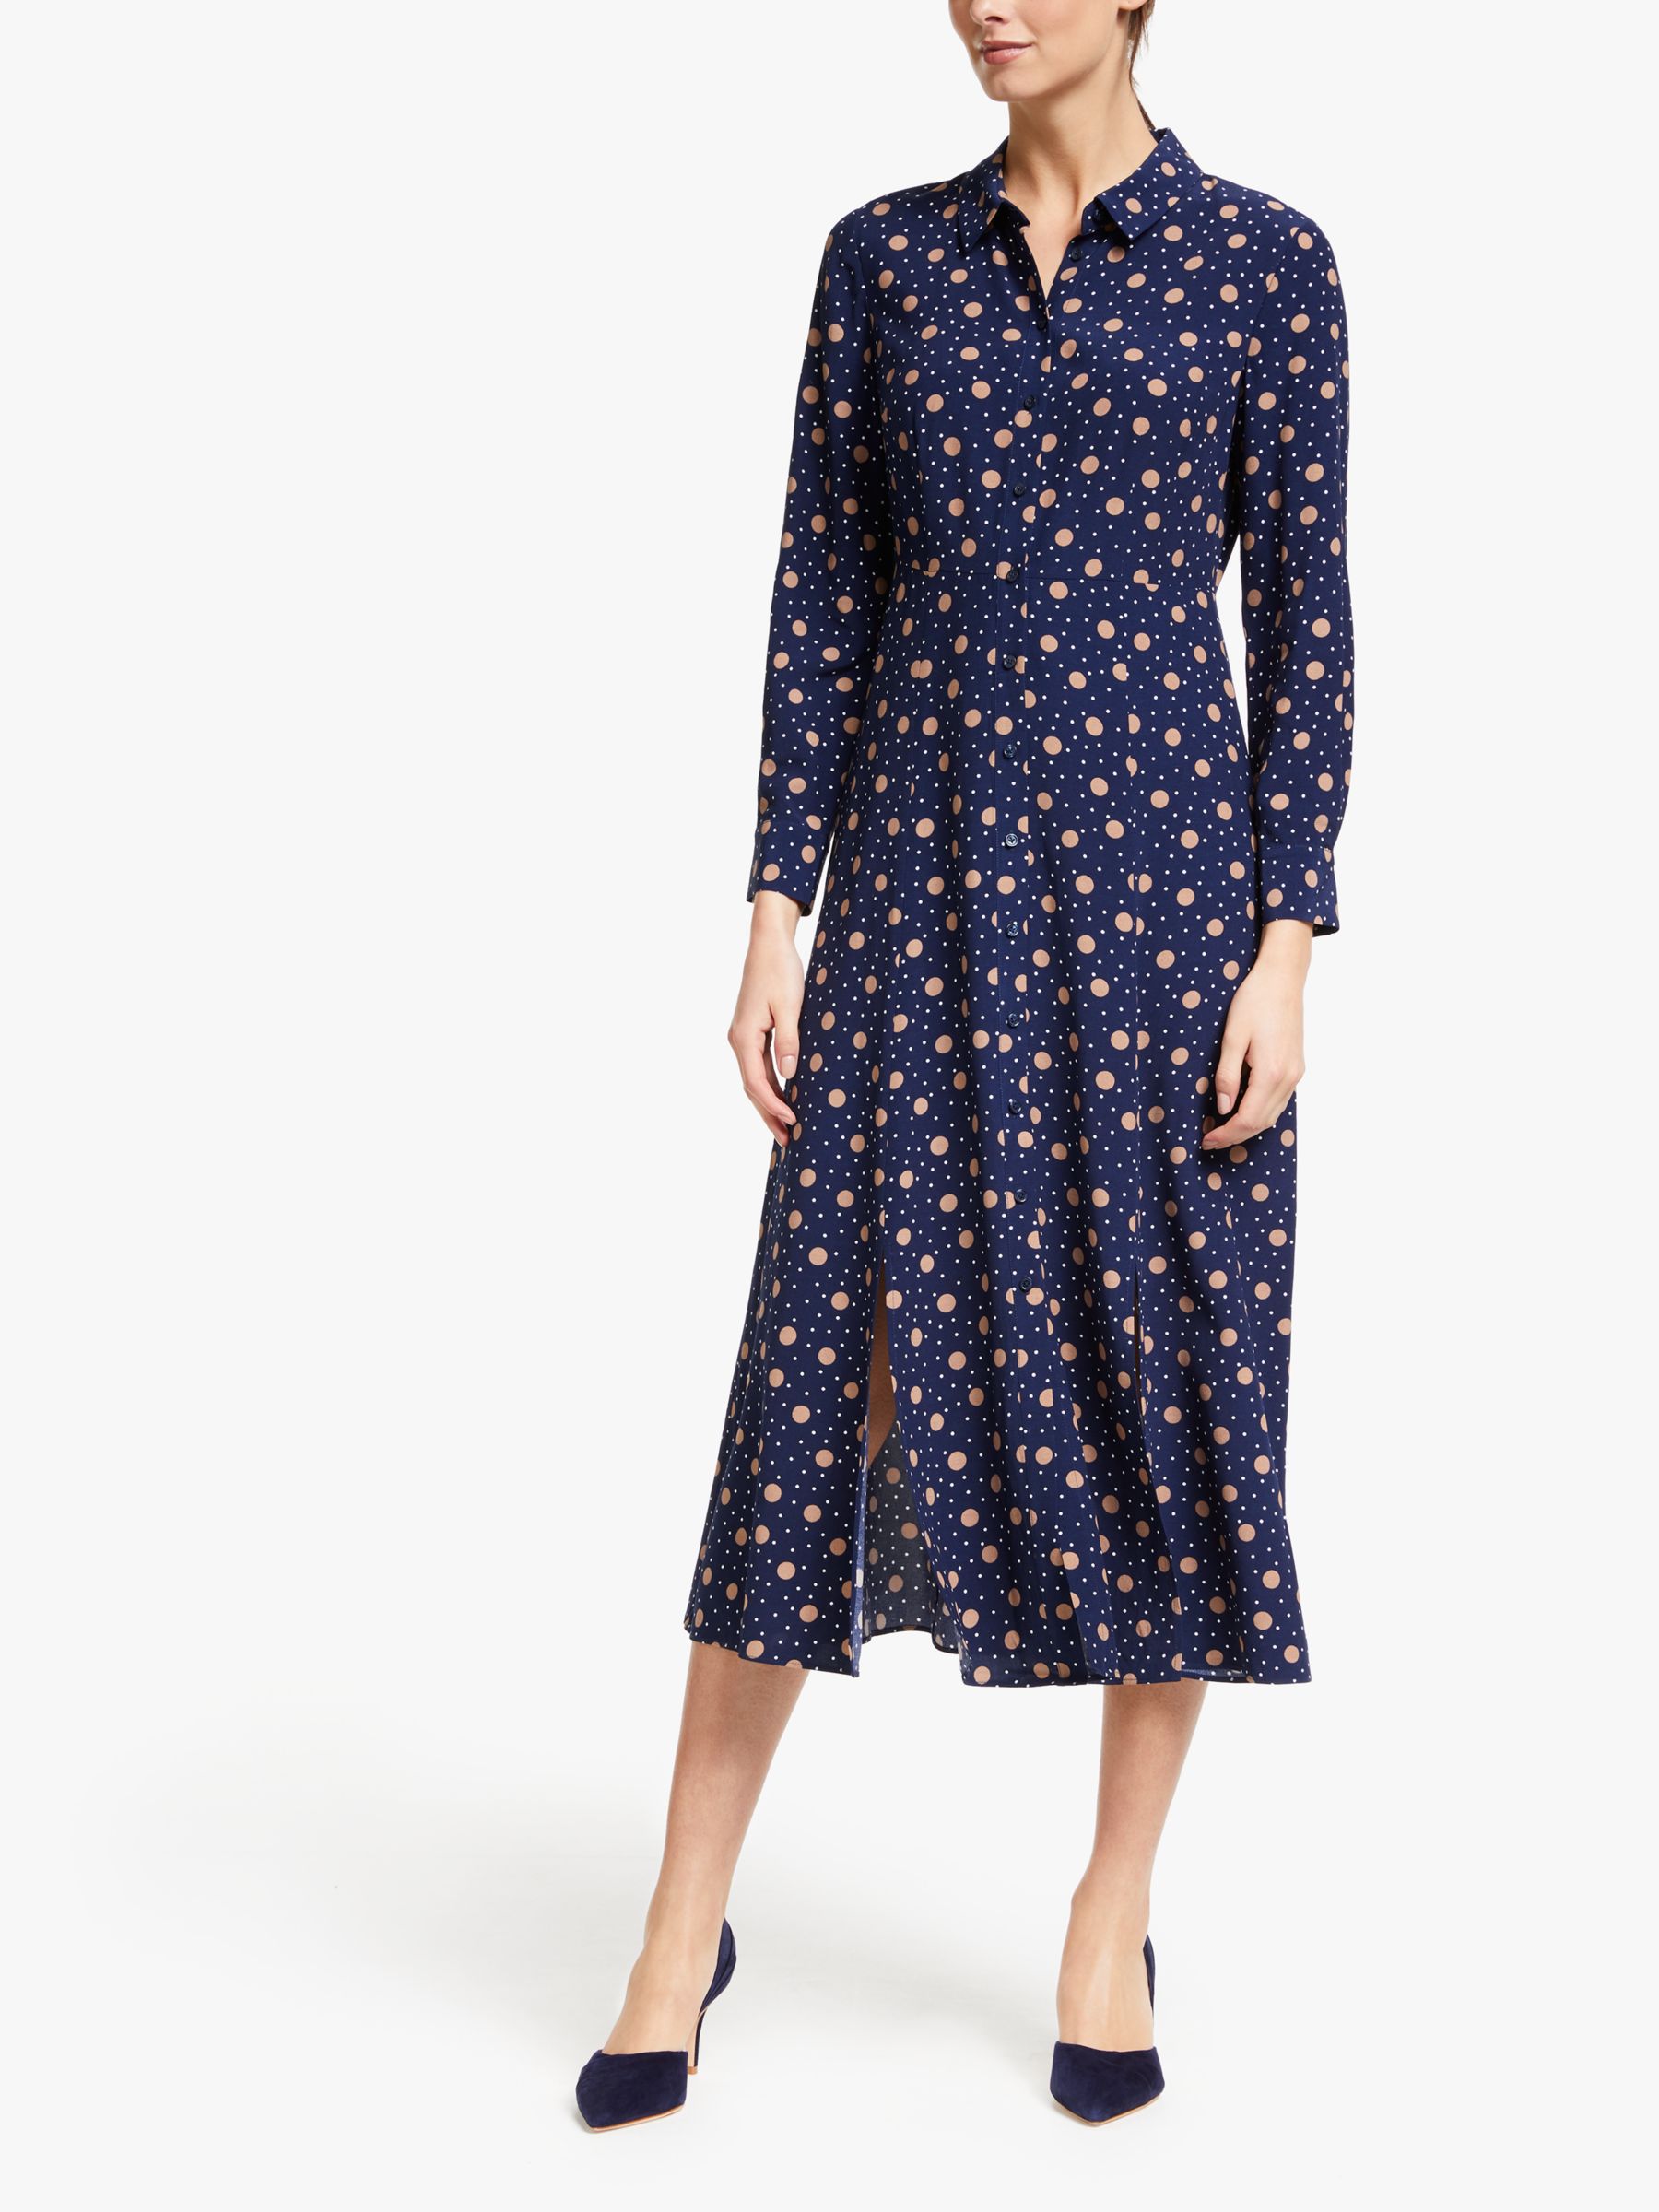 boden spotted dress